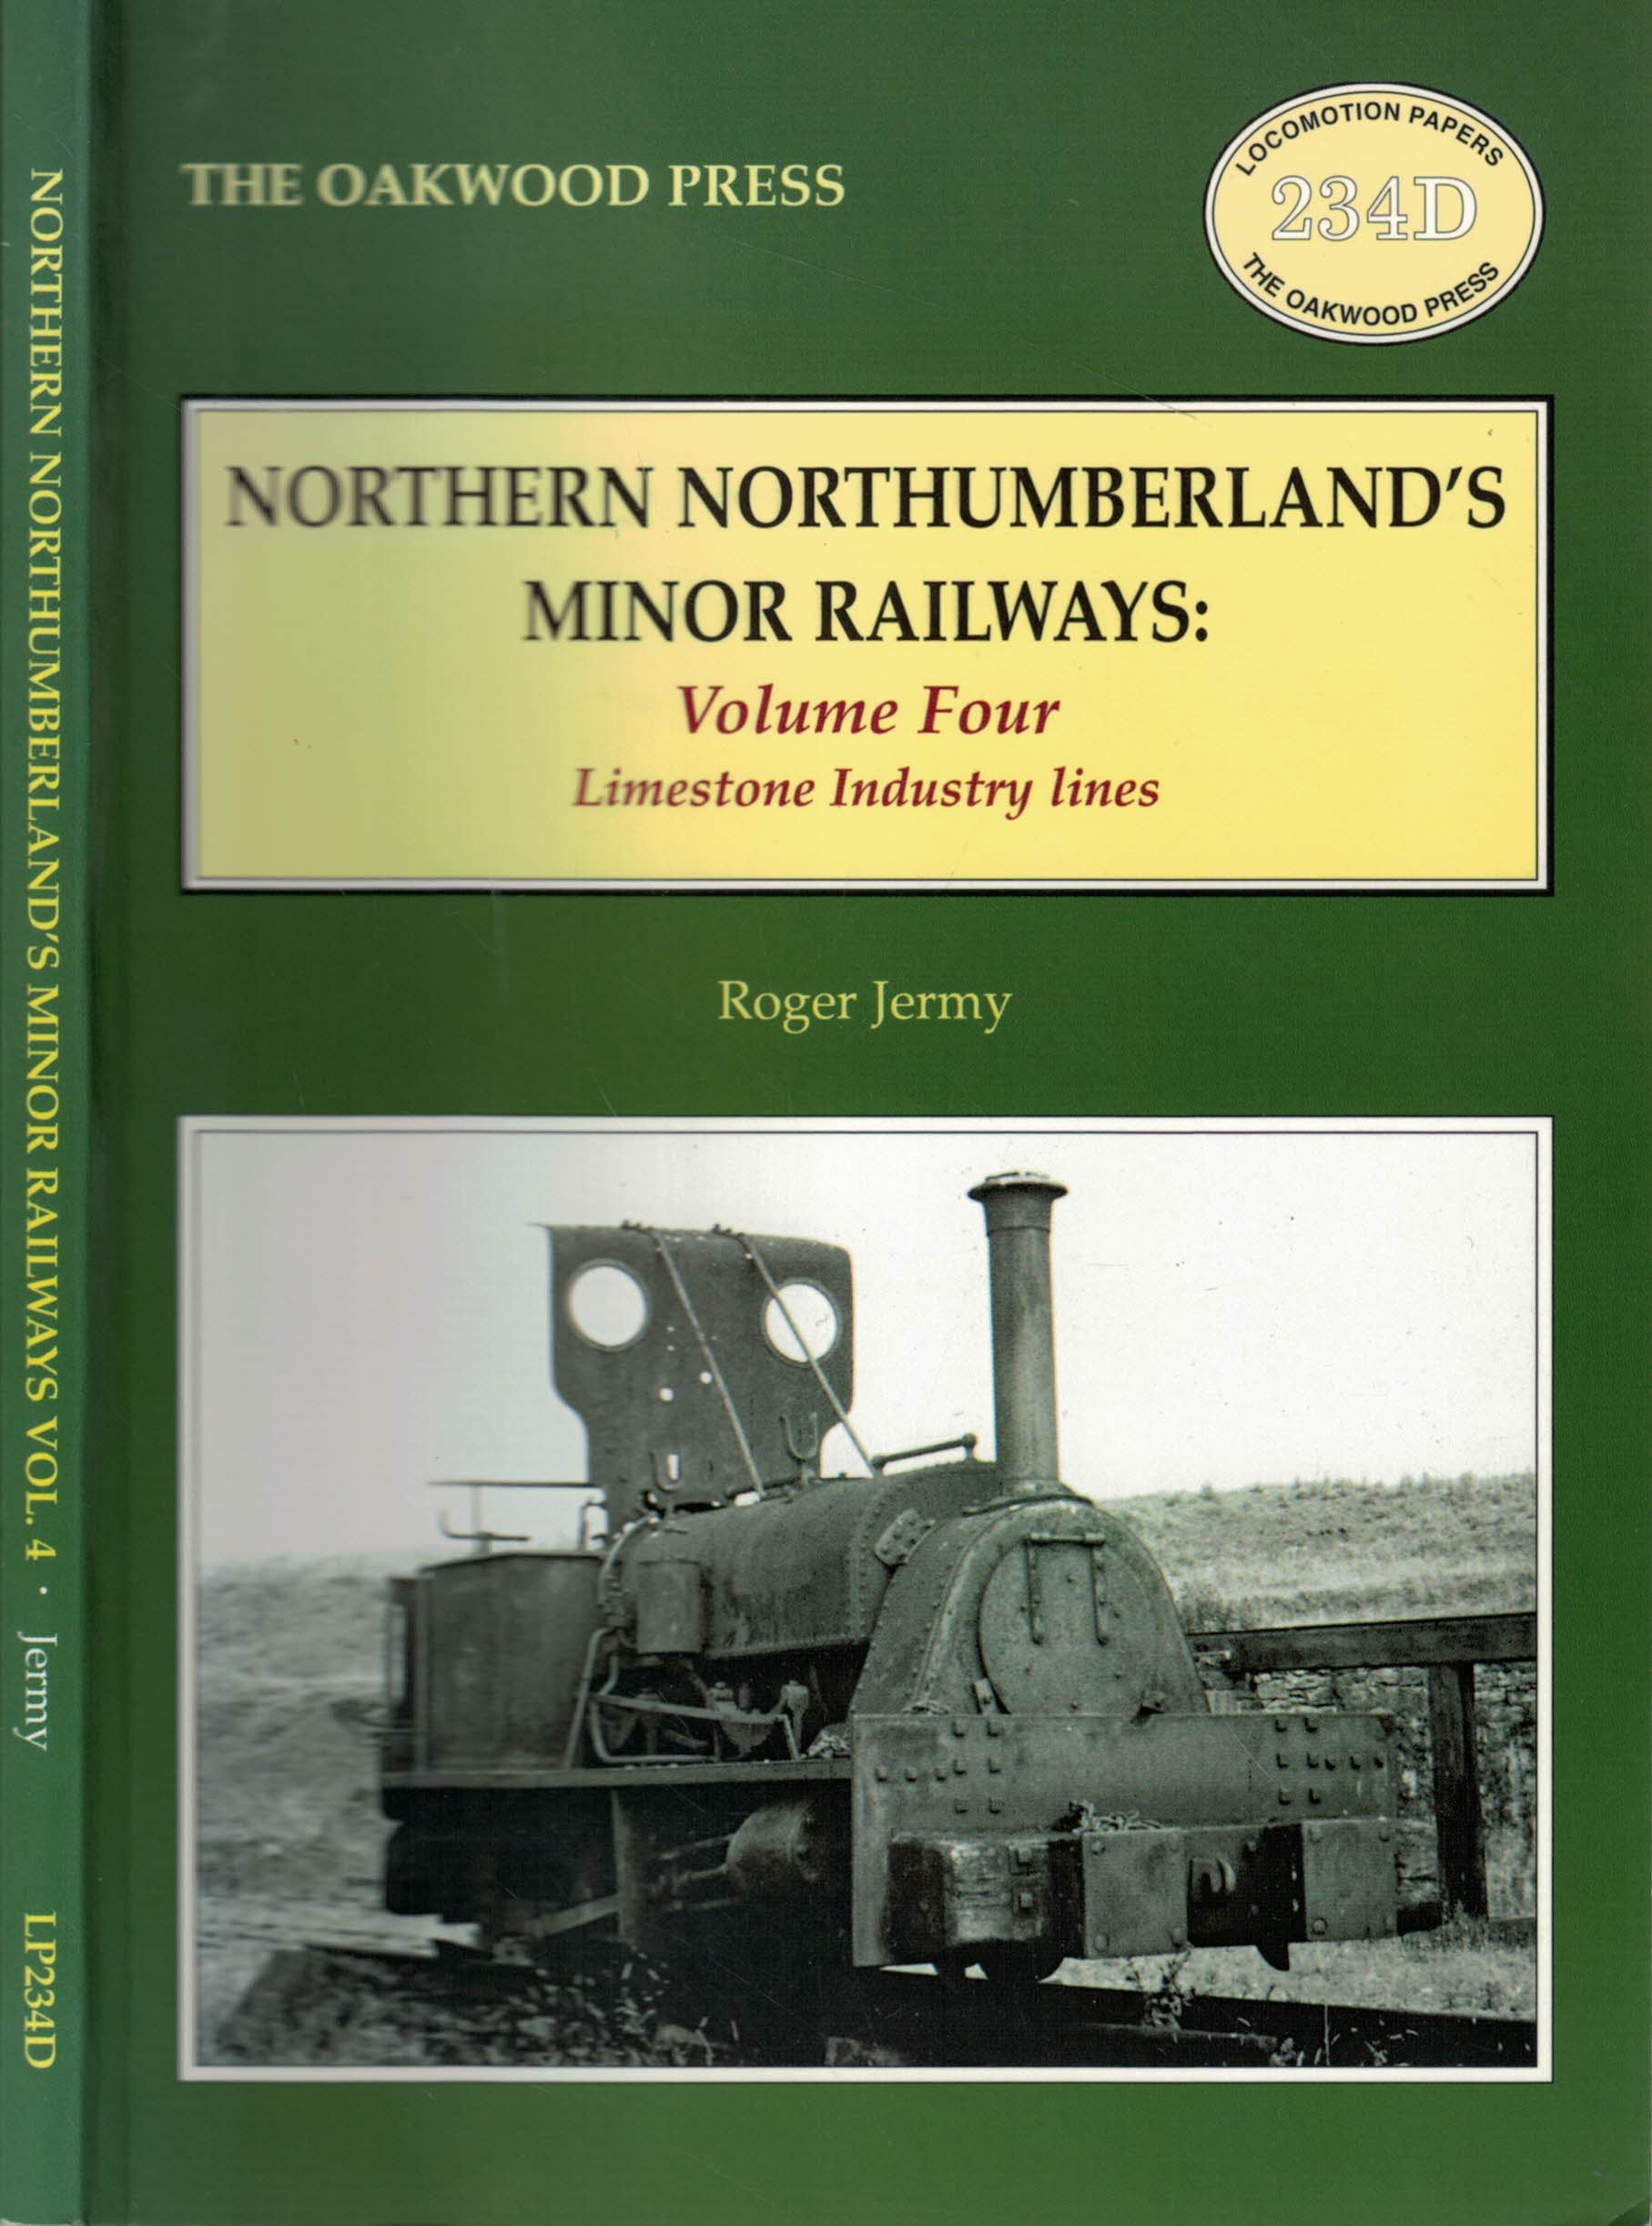 Northern Northumberland's Minor Railways: Volume Four. Limestone Industry Lines. Oakwood Locomotion Papers No 234D. Signed copy.